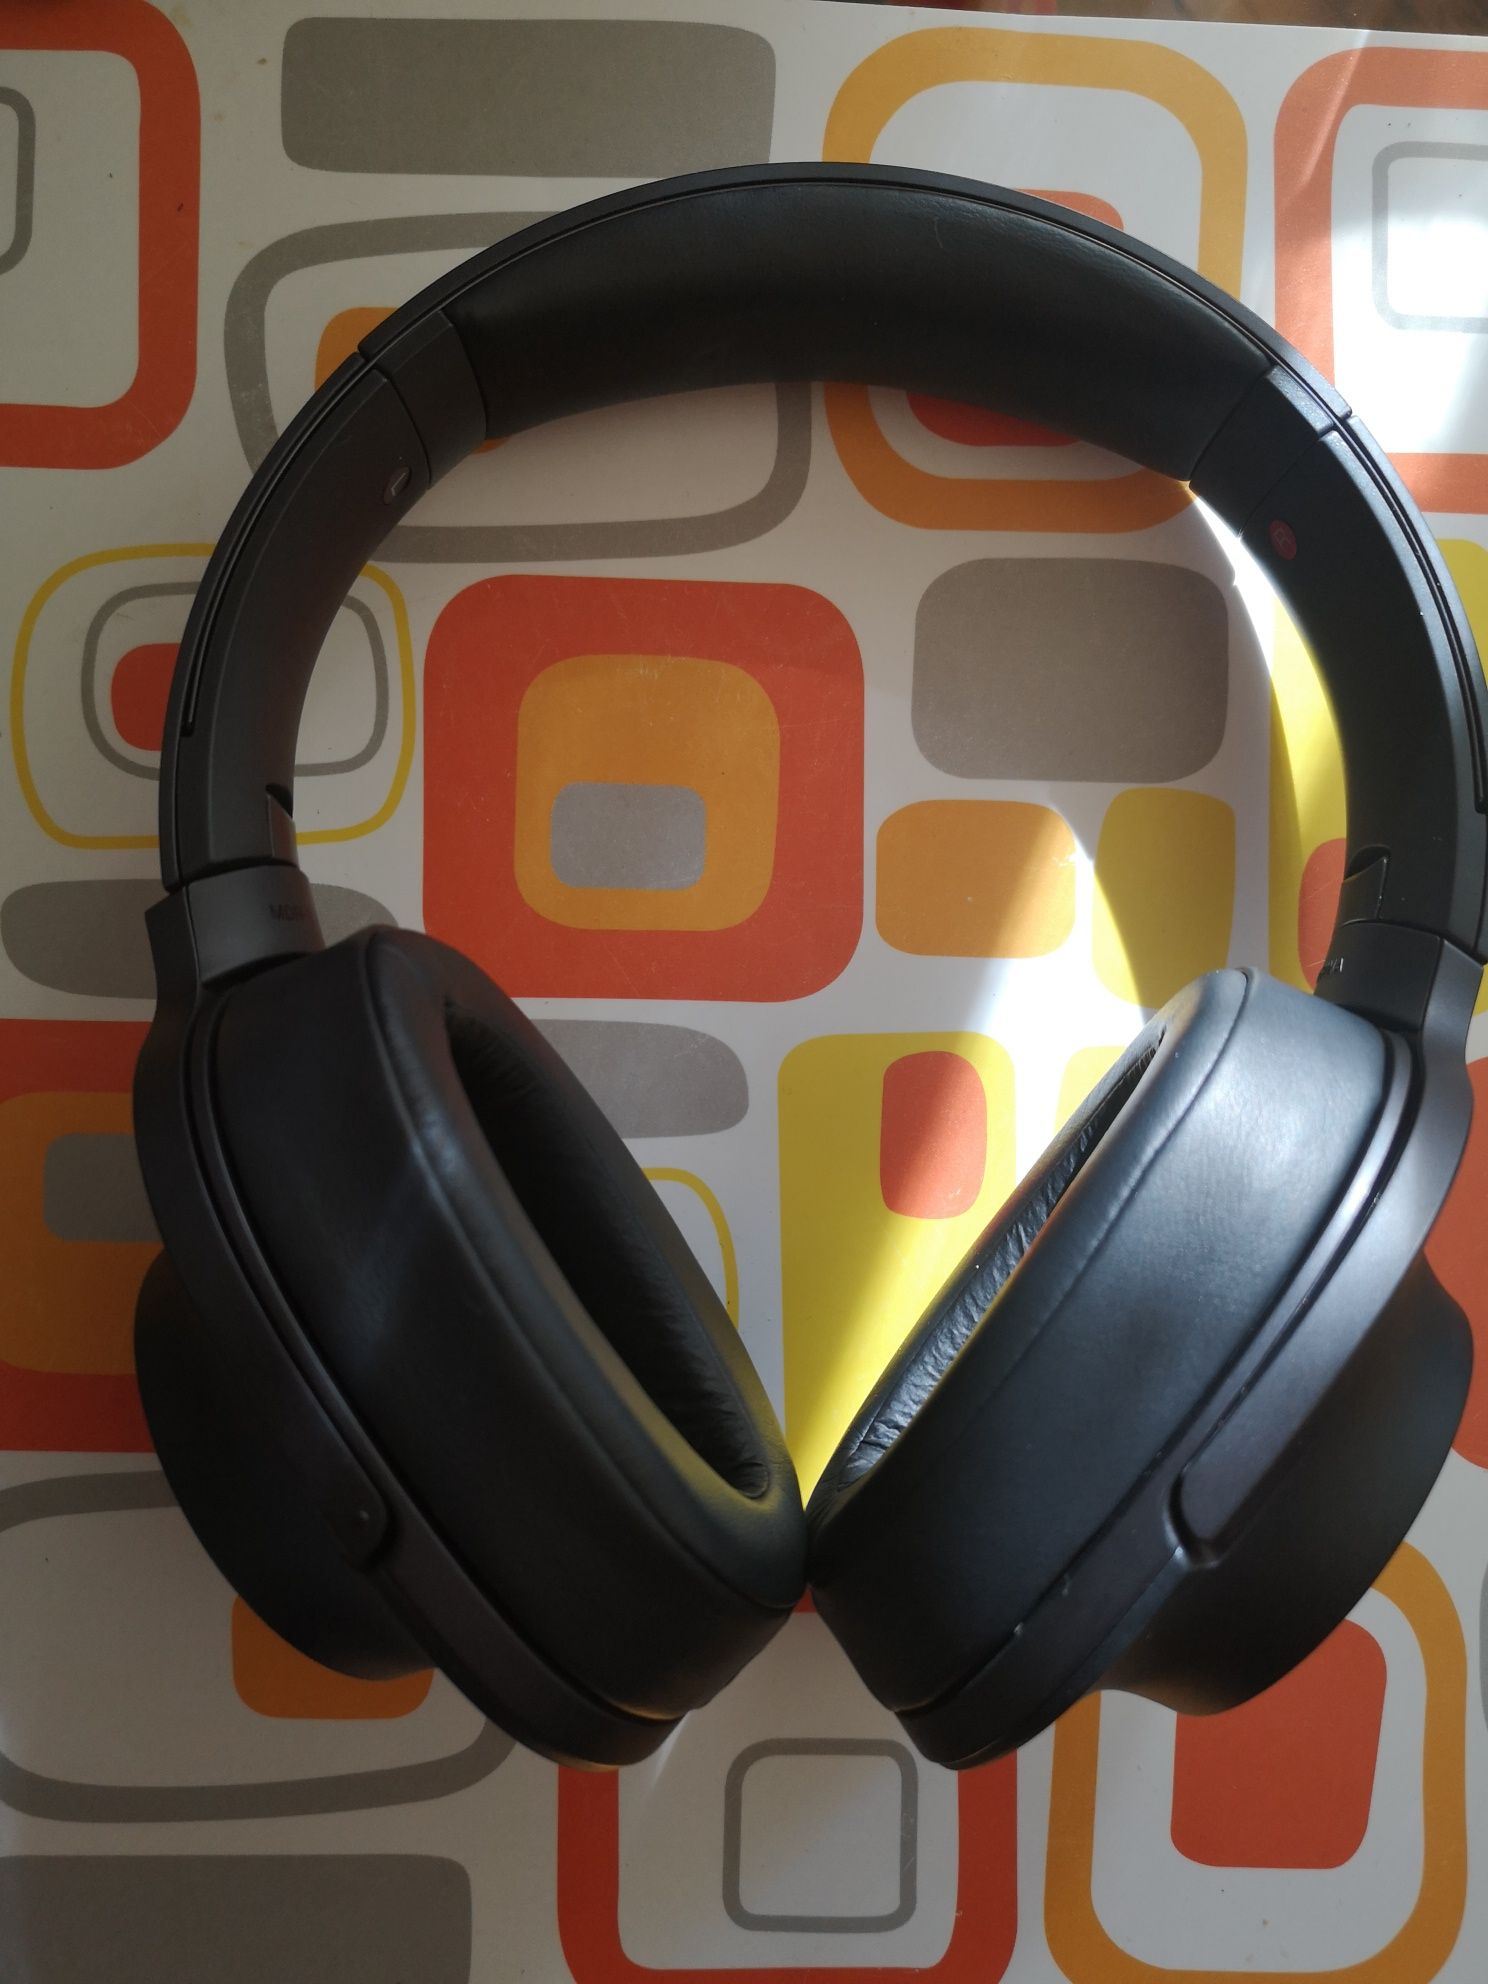 Sony MDR-100 AAPBC